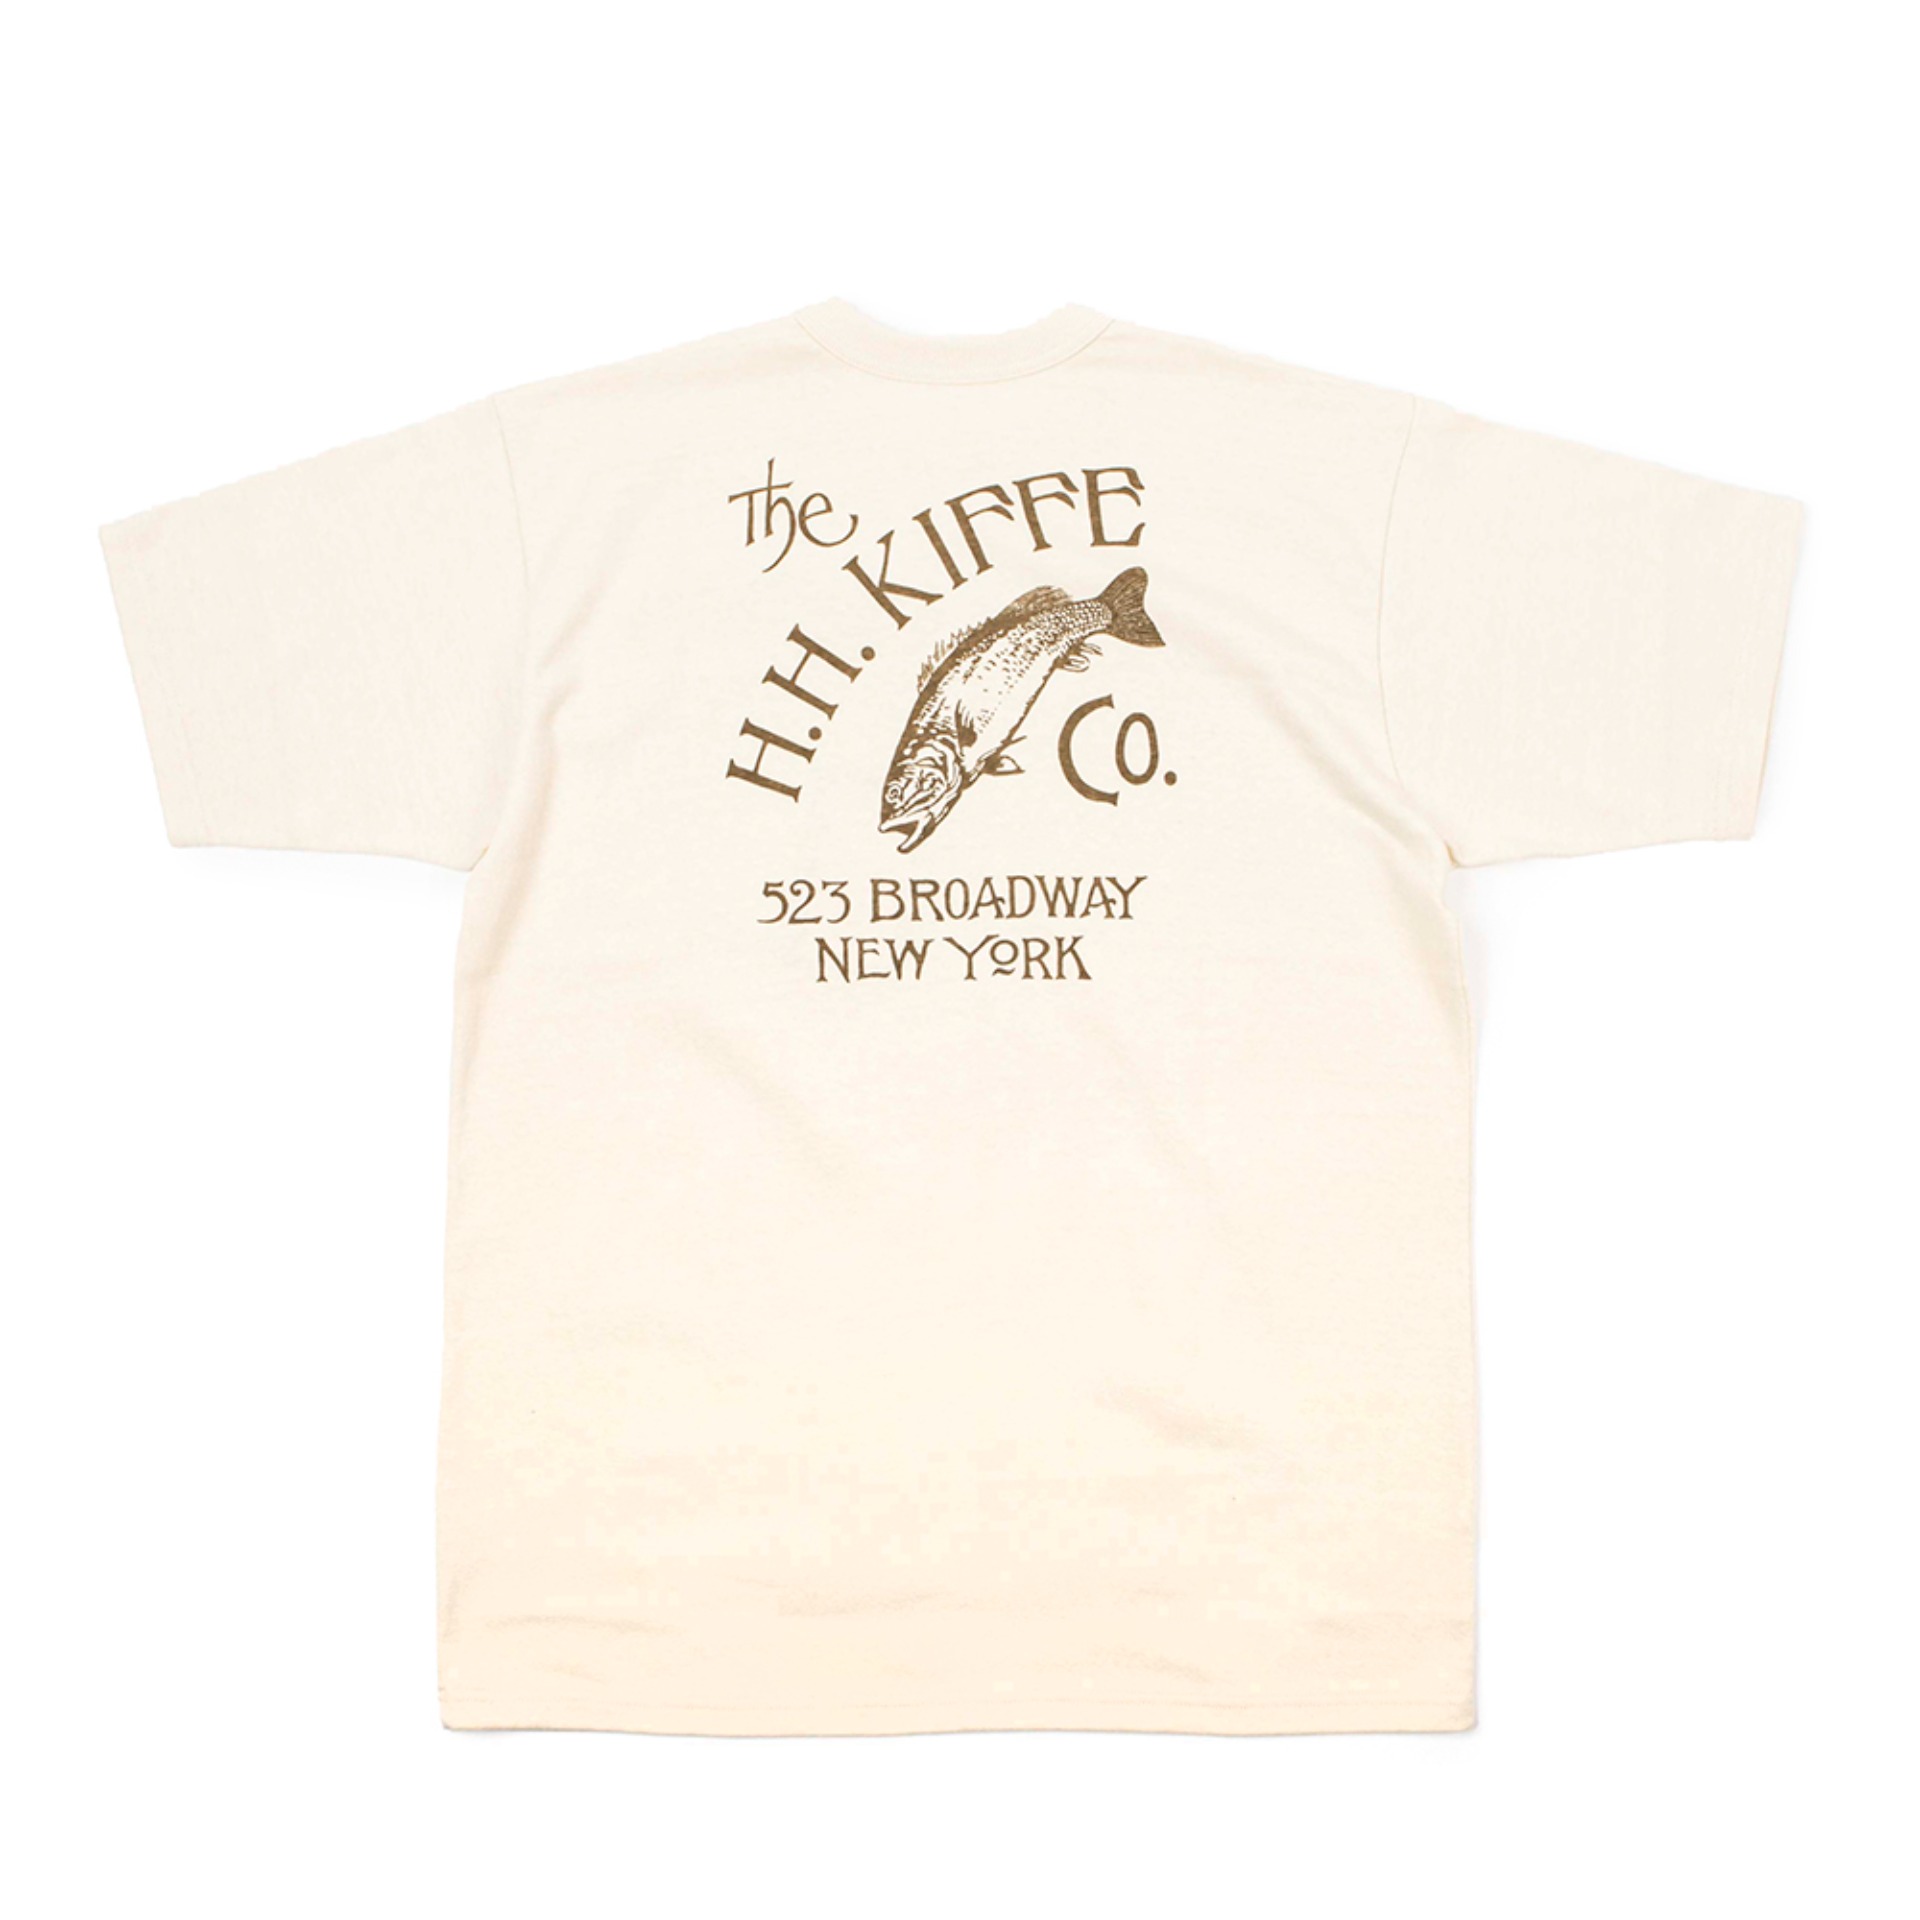 [Power Wear]Set In Sleeve T-shirt &quot;1939 The H.H. KIFFE Co.&quot;(Straw Cream)